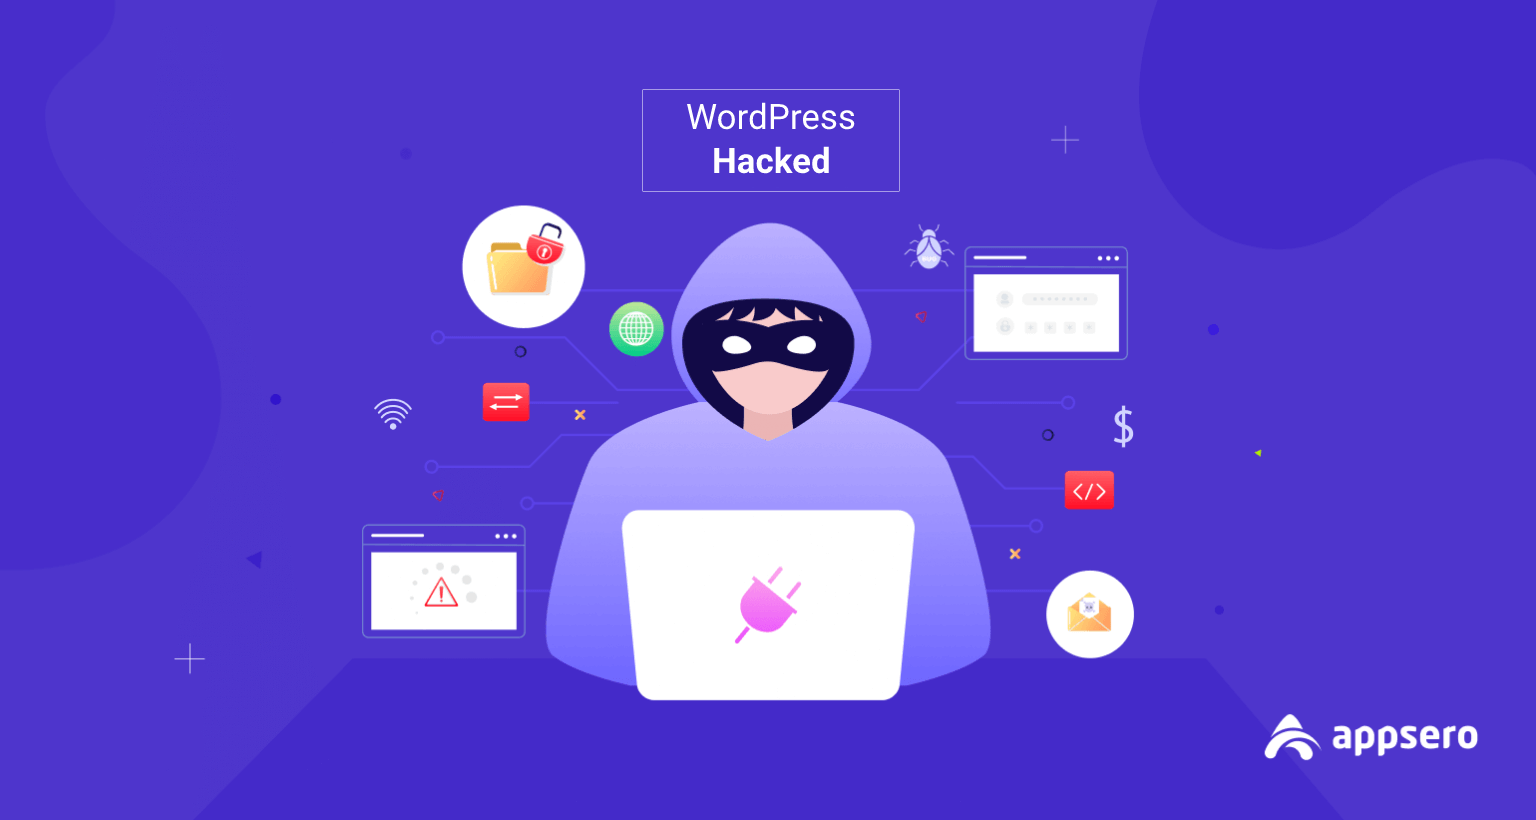 What to Do When WordPress Site is Hacked?